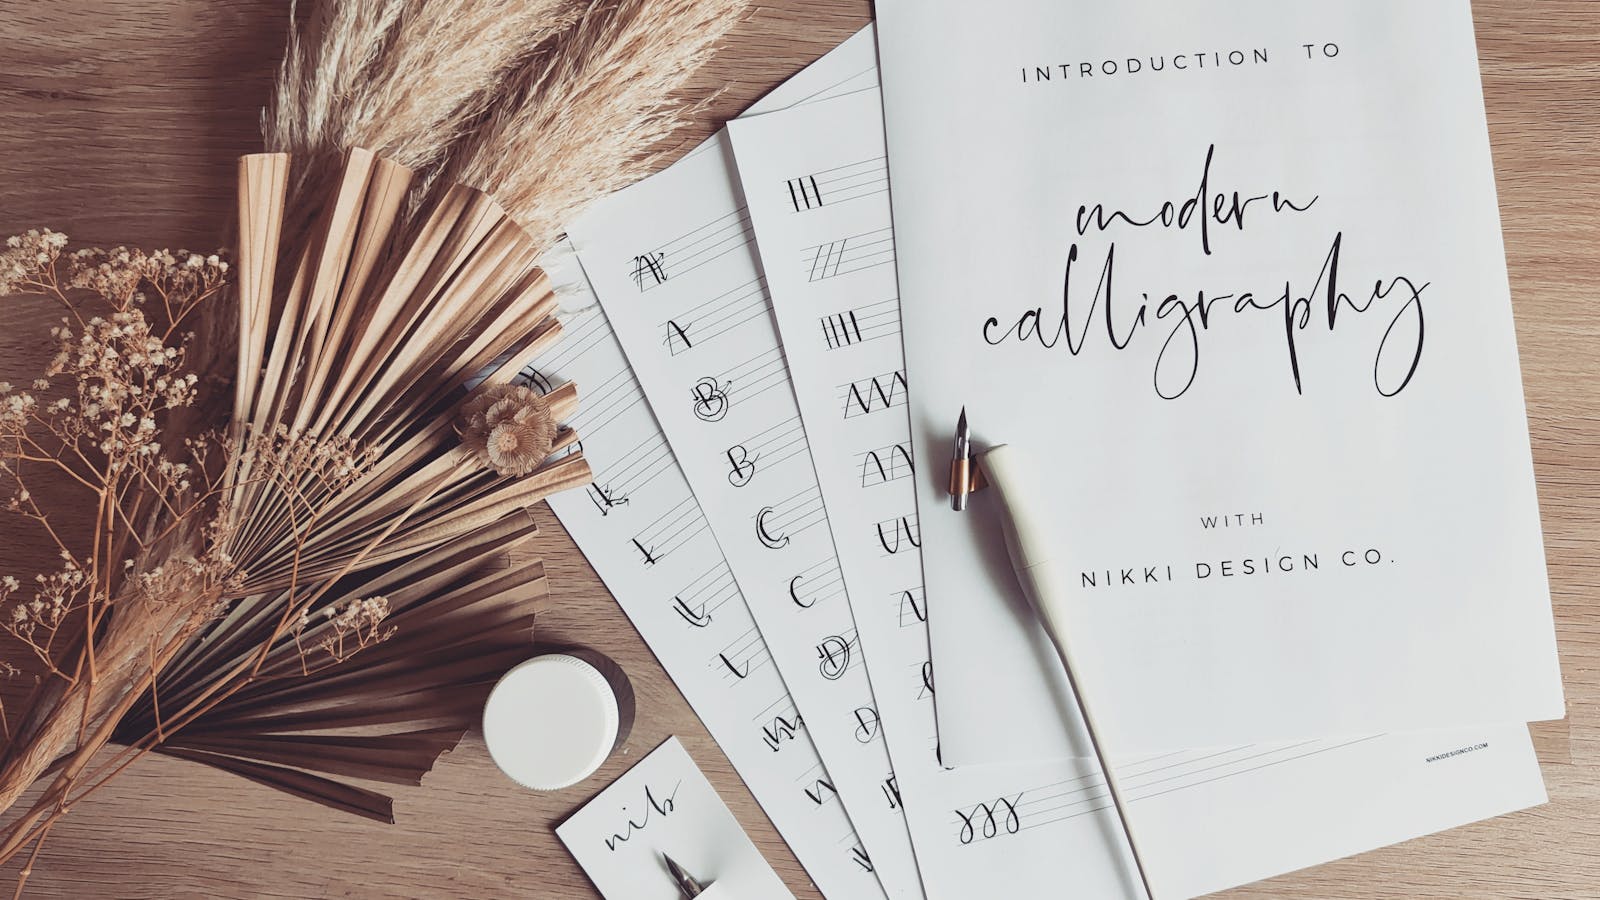 Image for Introduction to Modern Calligraphy Workshop with Nikki Design Co.